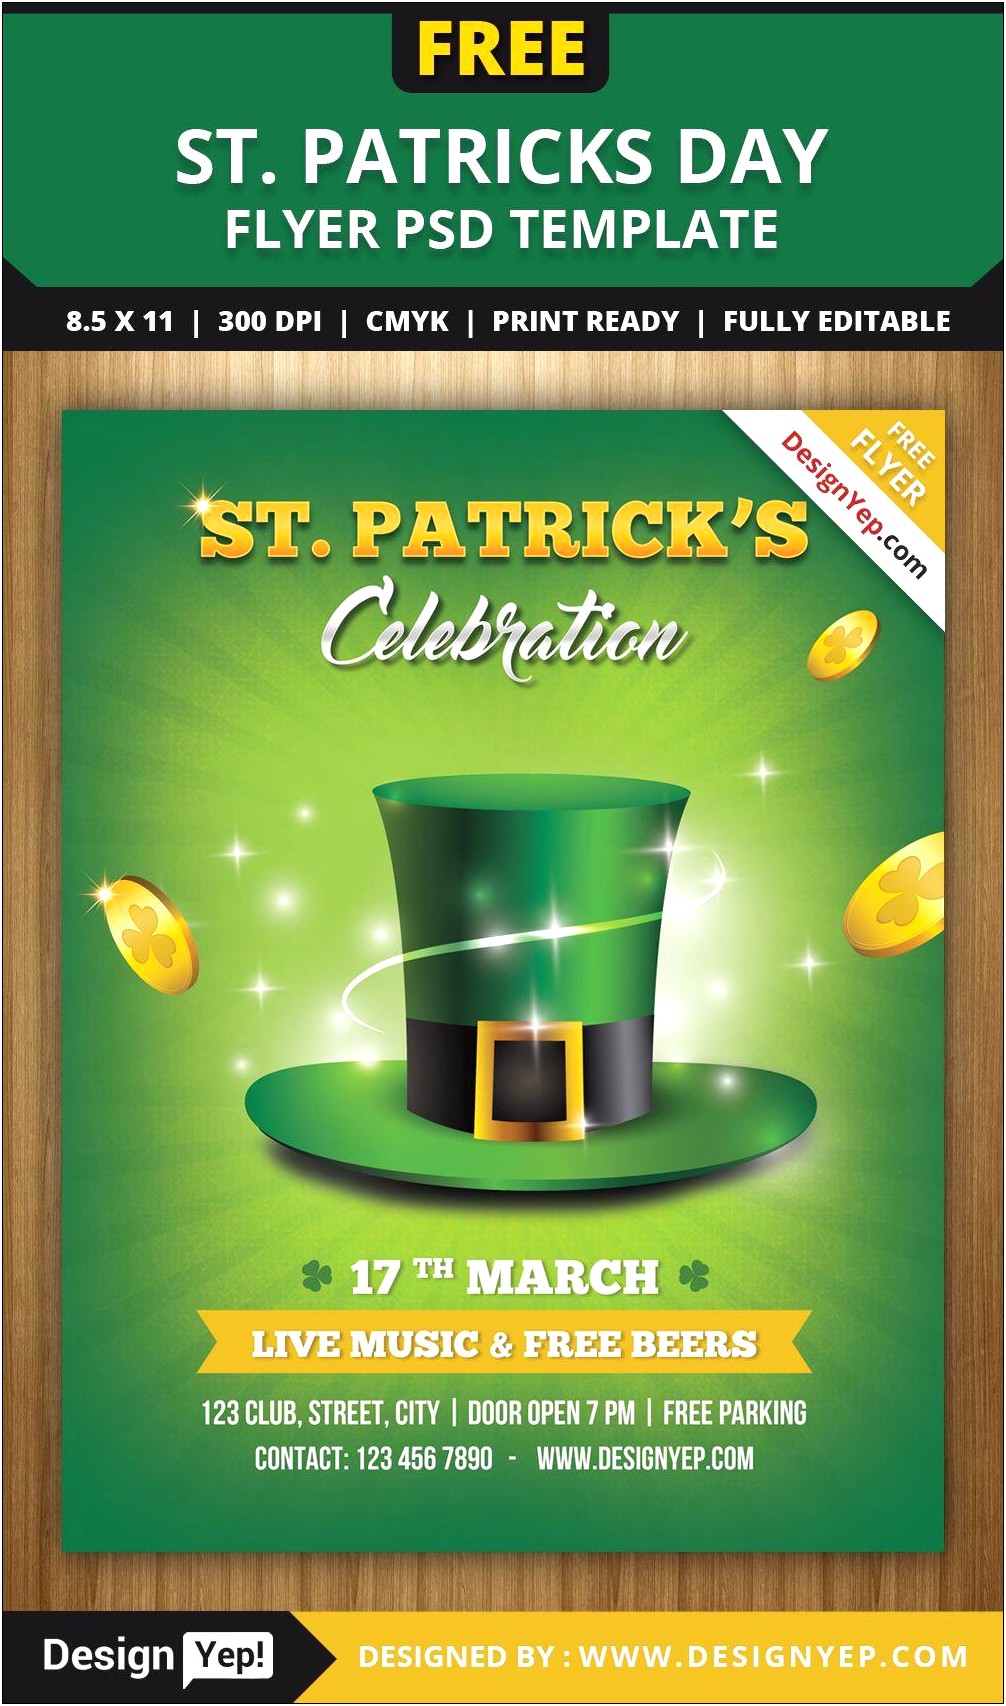 Free Flyer Templates St Patrick's Day